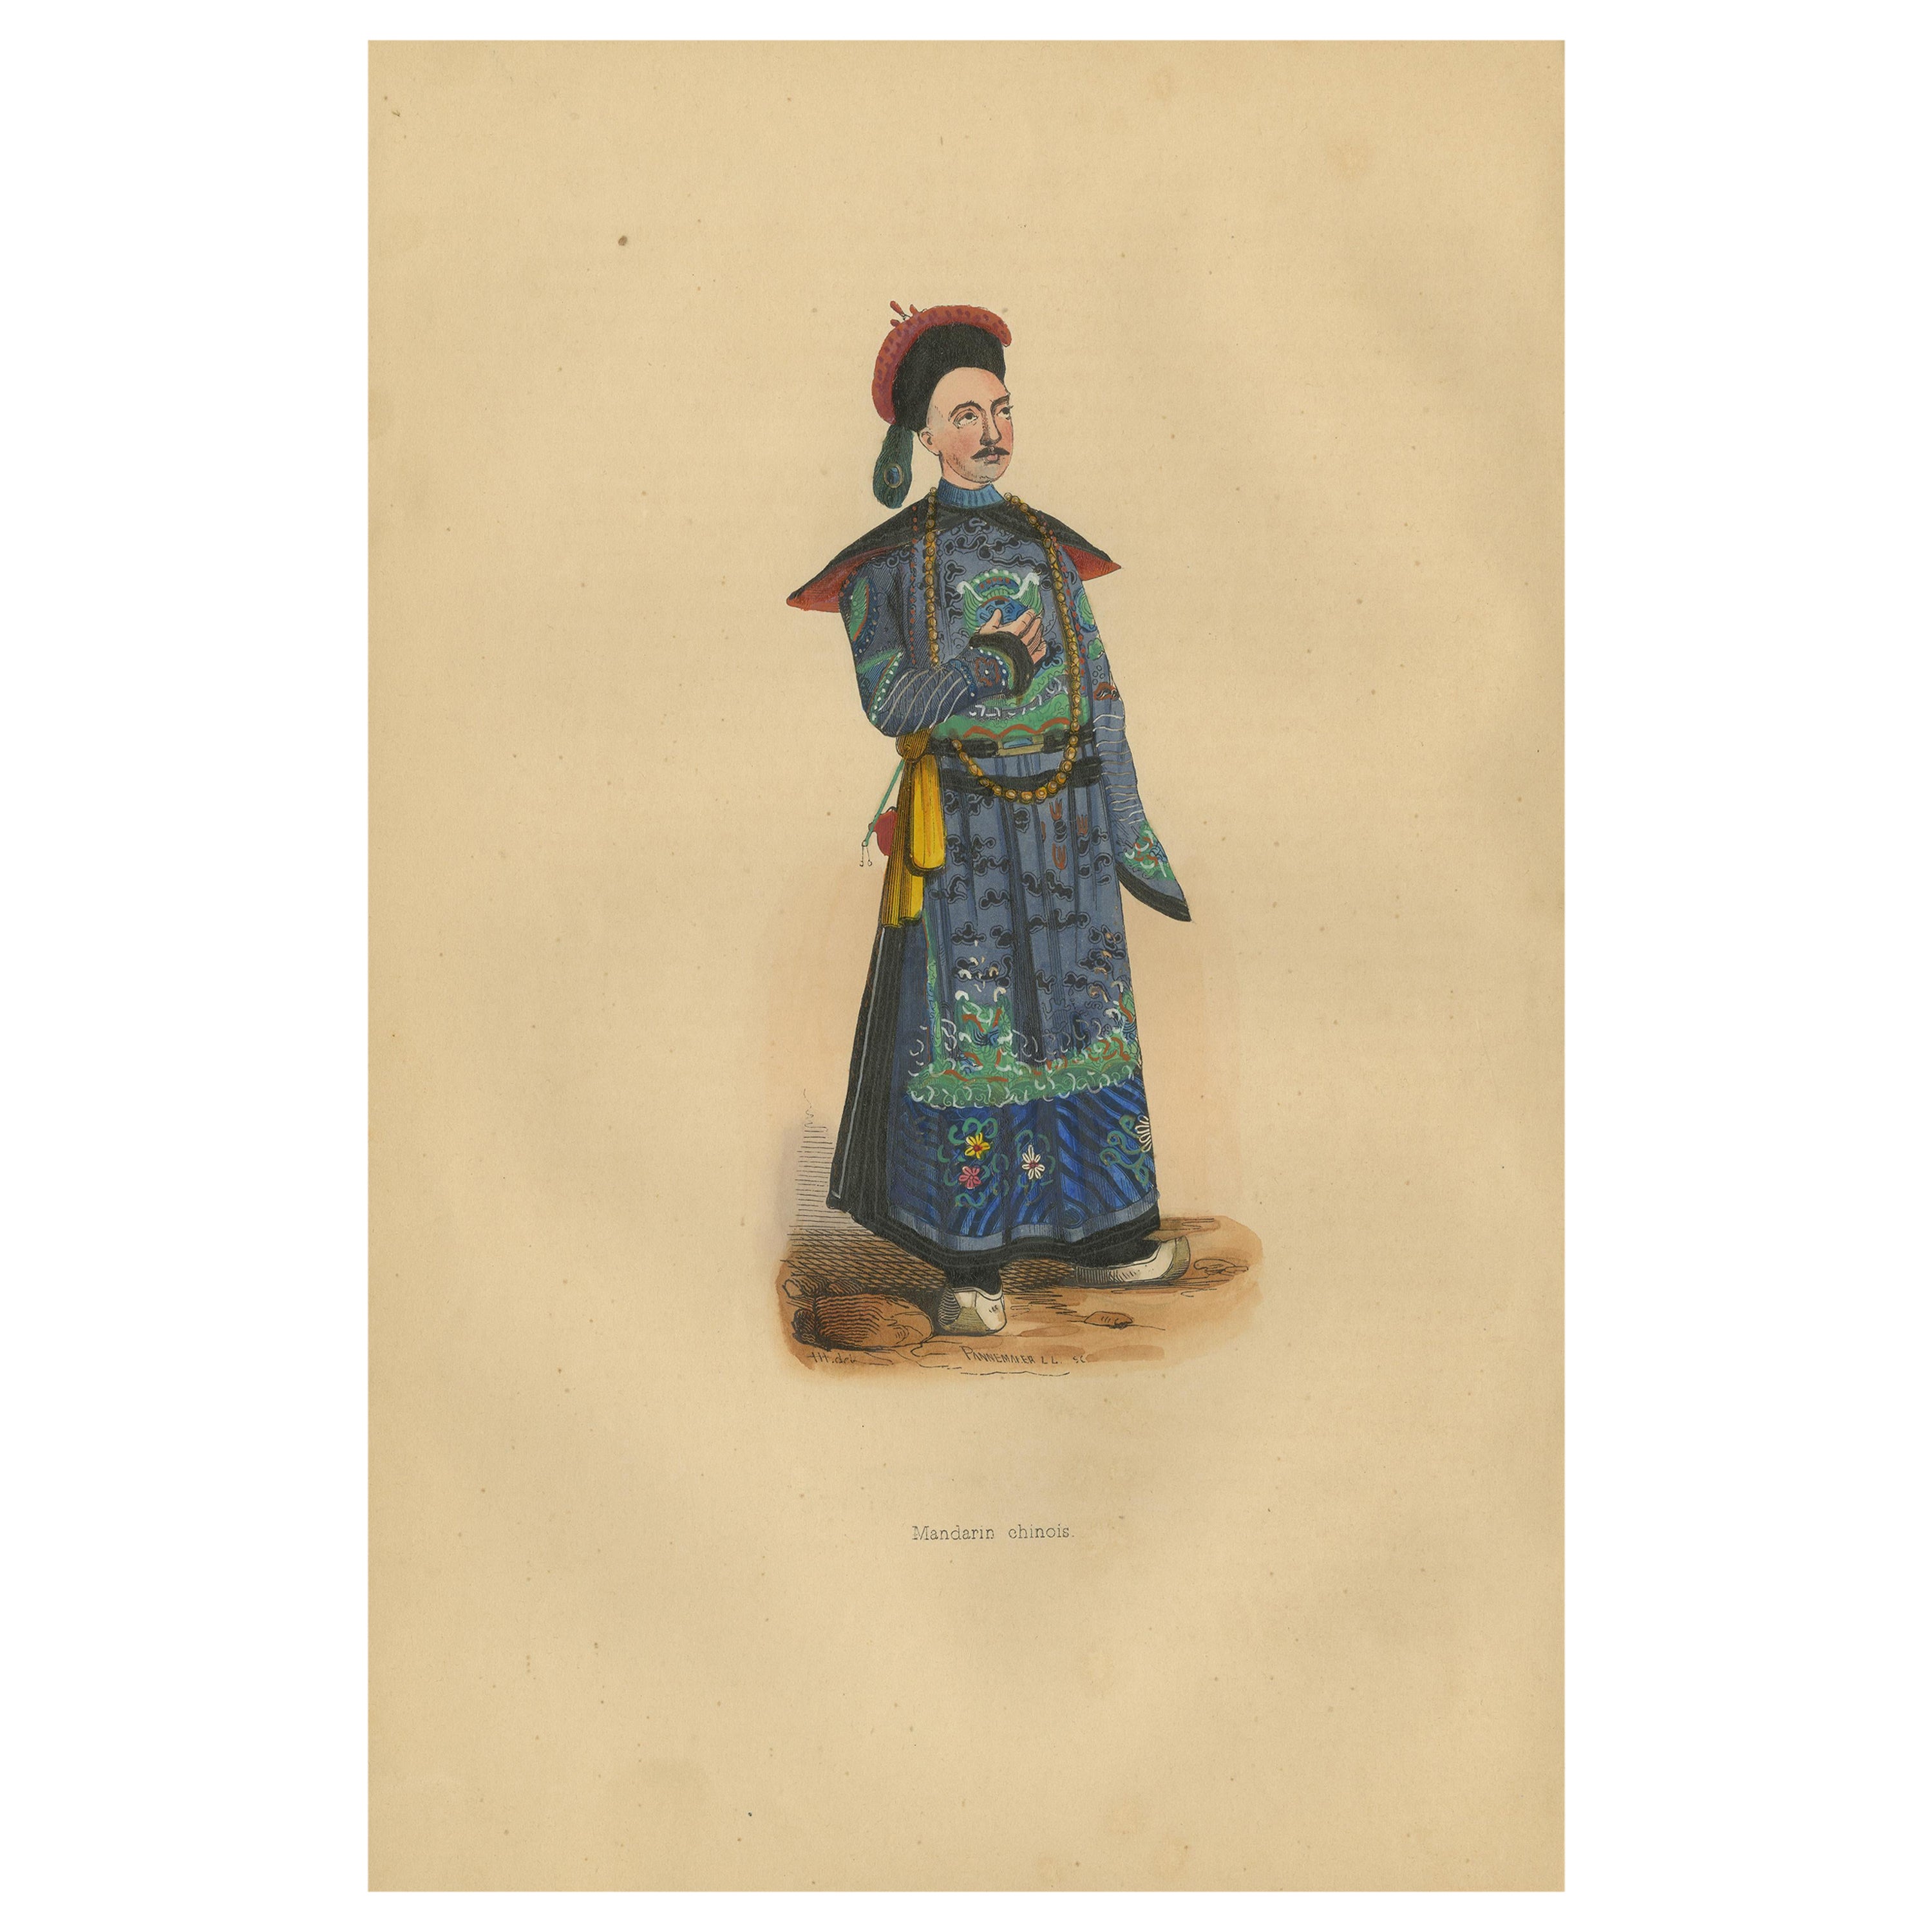 Antique Print of a Chinese Man 'Mandarin' by Wahlen, '1843'